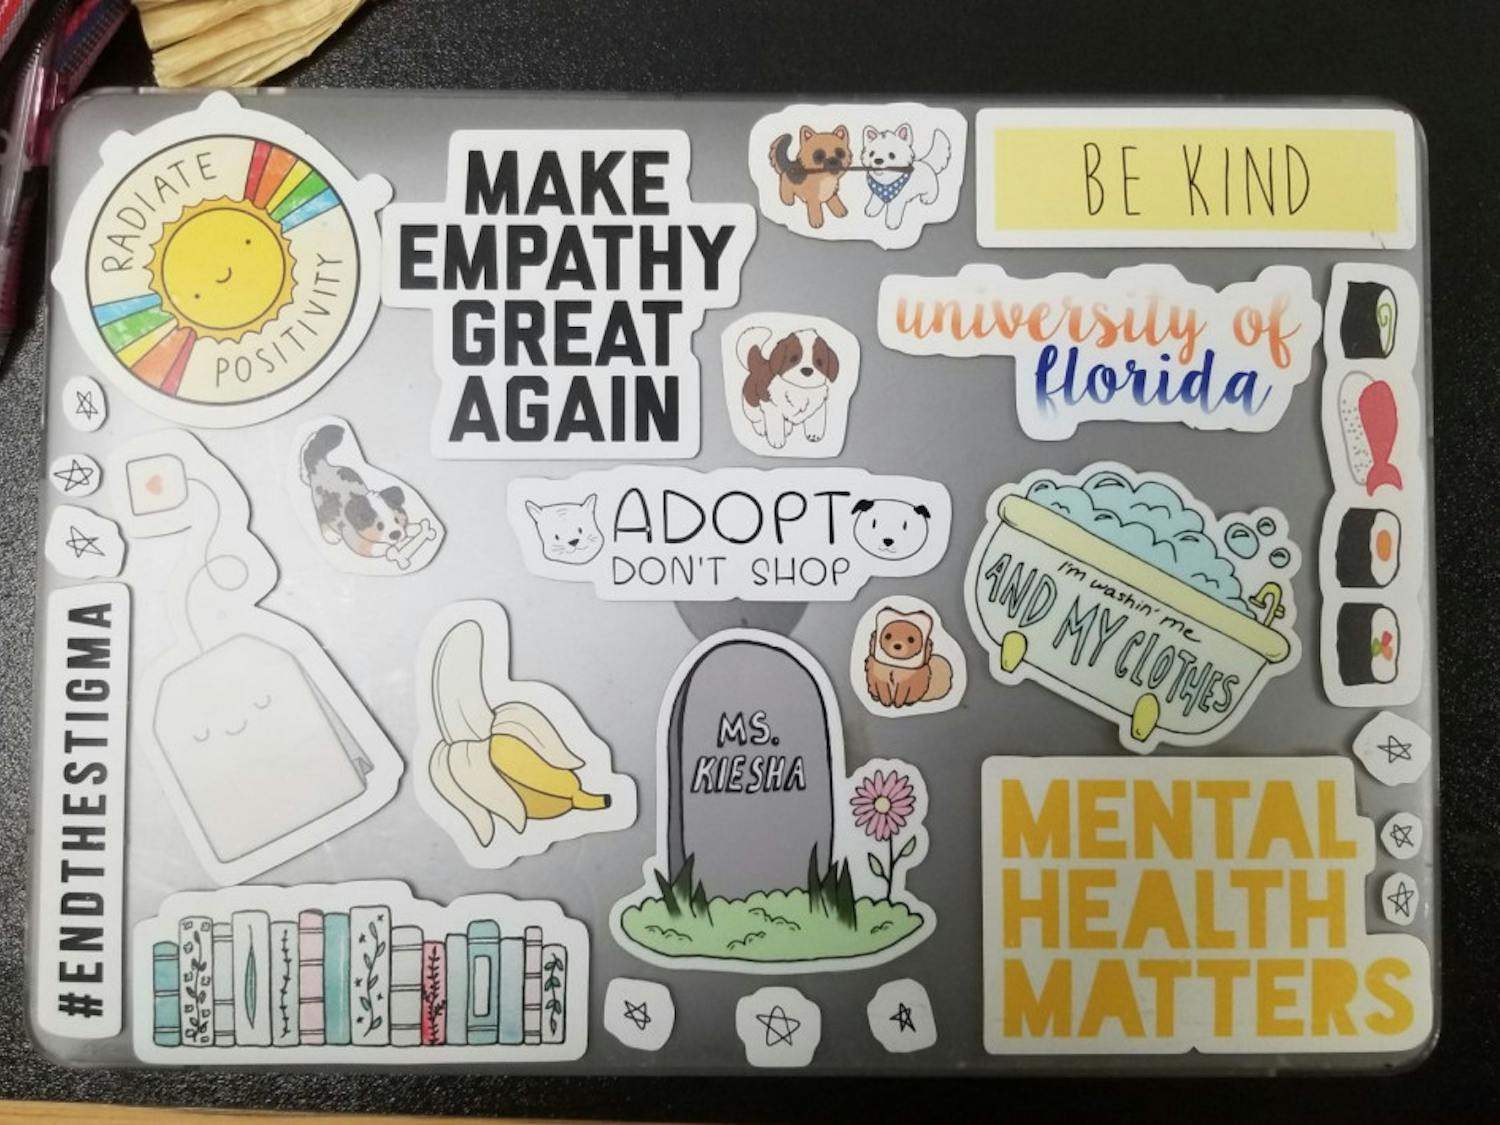 Shelby Luckey is a 20-year-old UF psychology junior, and she loves expressing herself by decorating her laptop. Luckey has stickers like “End the Stigma” and “Mental Health Matters” because, as someone who wants to be a therapist, she understands the importance of mental health. Luckey also volunteers at the Alachua Humane Society and believes in adopting animals, which is why one of her stickers says “Adopt Don’t Shop.”
&nbsp;